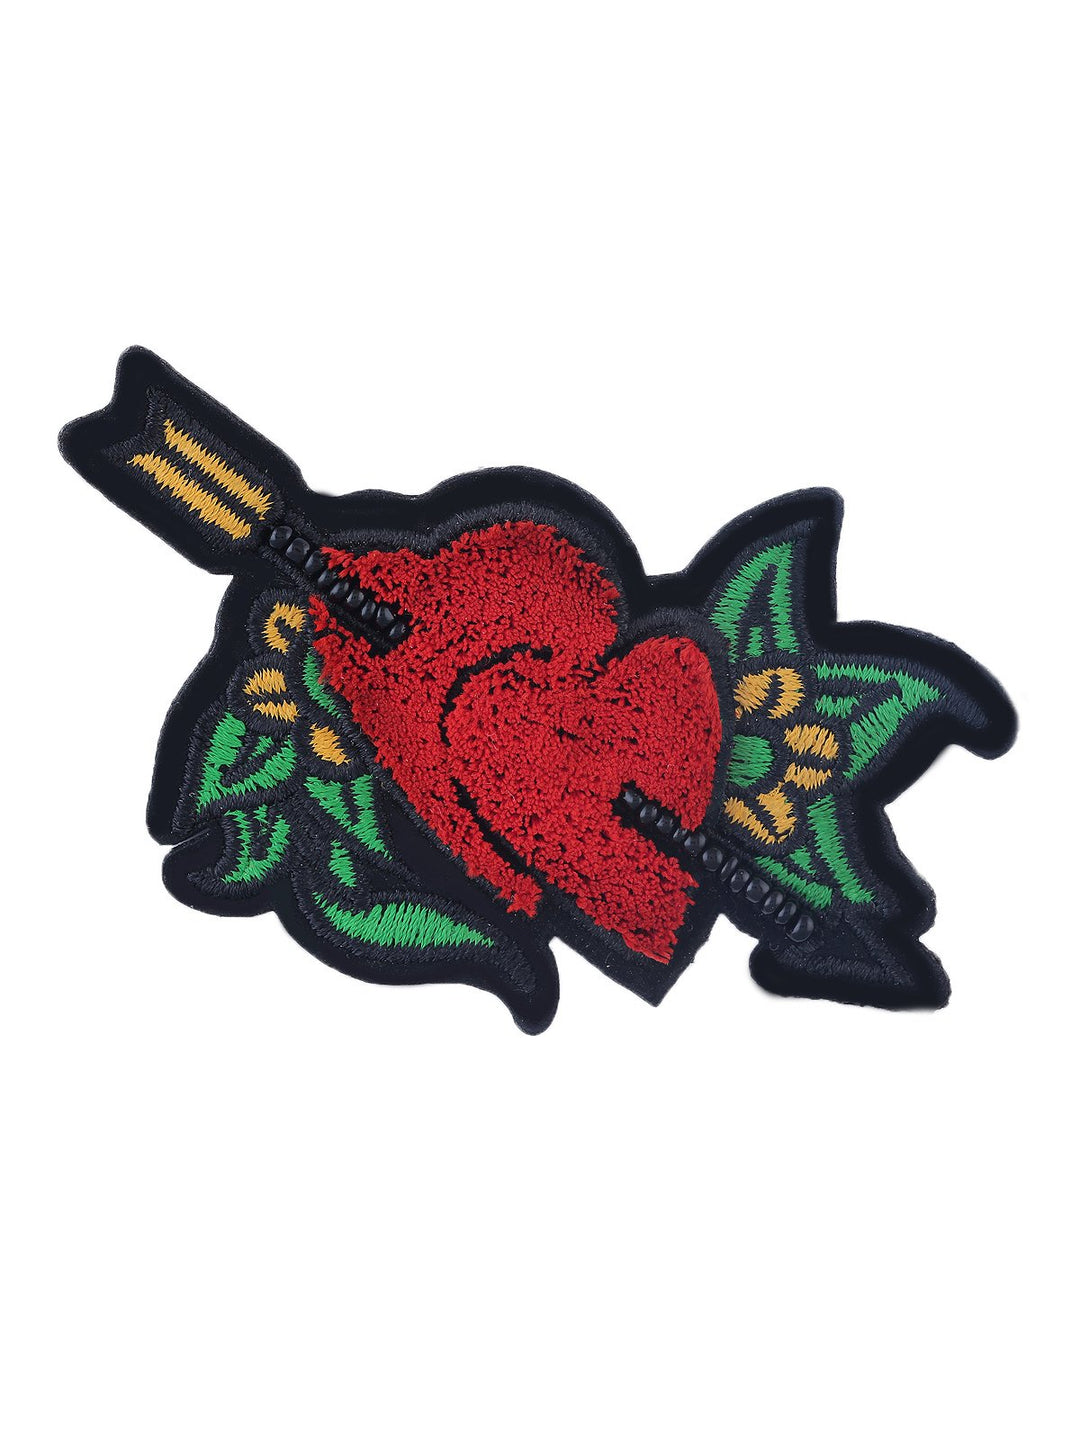 Gorgeous Embroidered Sew On Beaded Red Cupid Heart & Arrow Patch